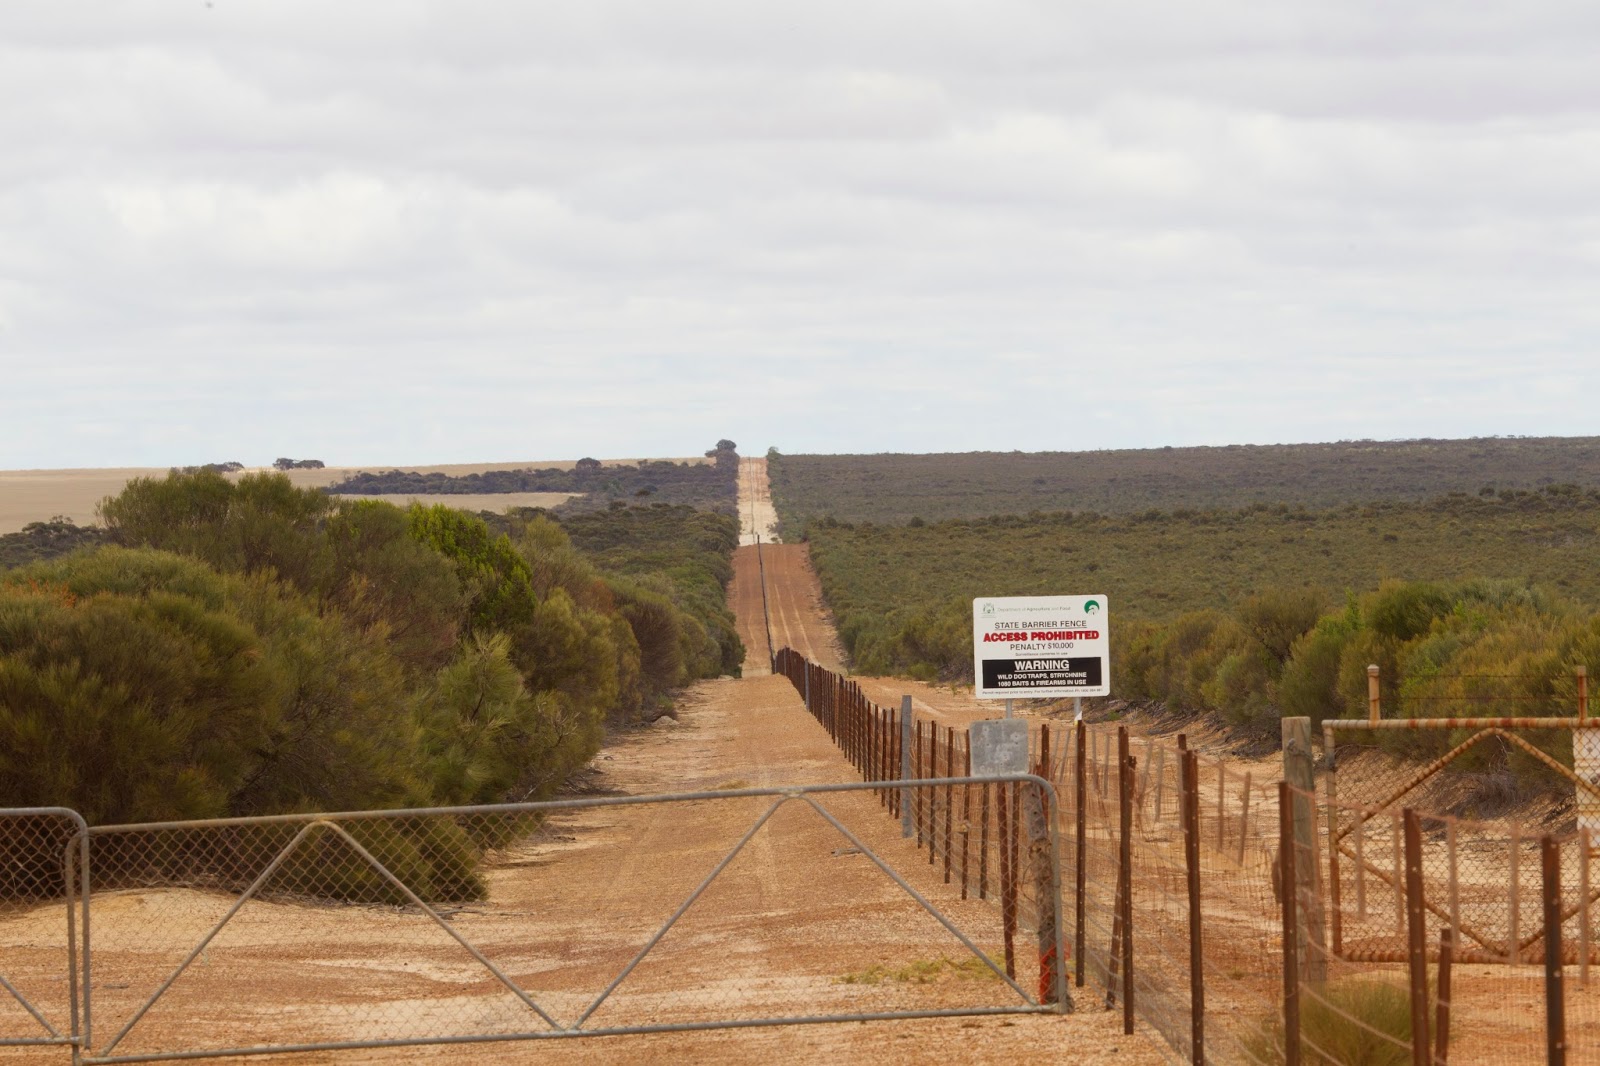 Not just a rabbit proof fence